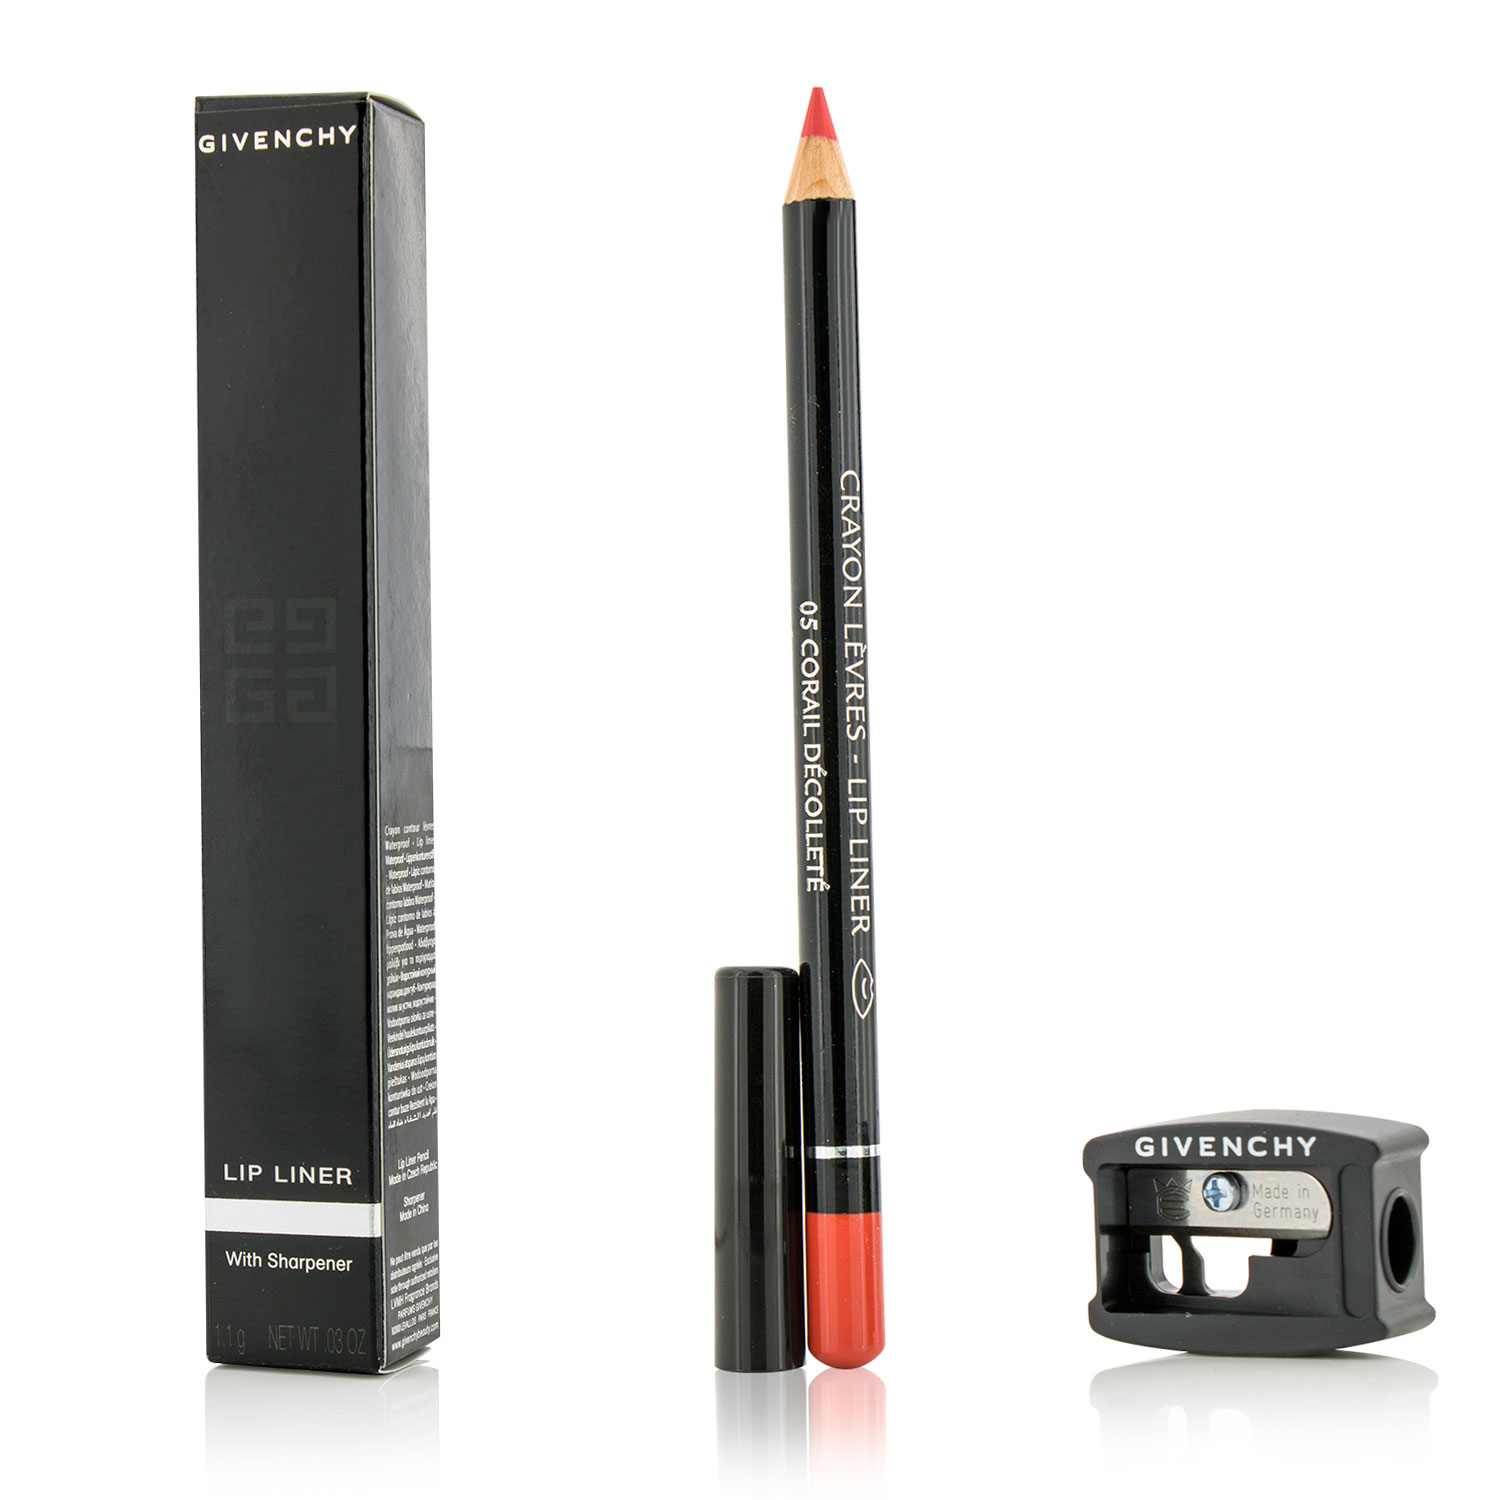 Lip Liner (With Sharpener) - # 05 Corail Decollete Givenchy Image